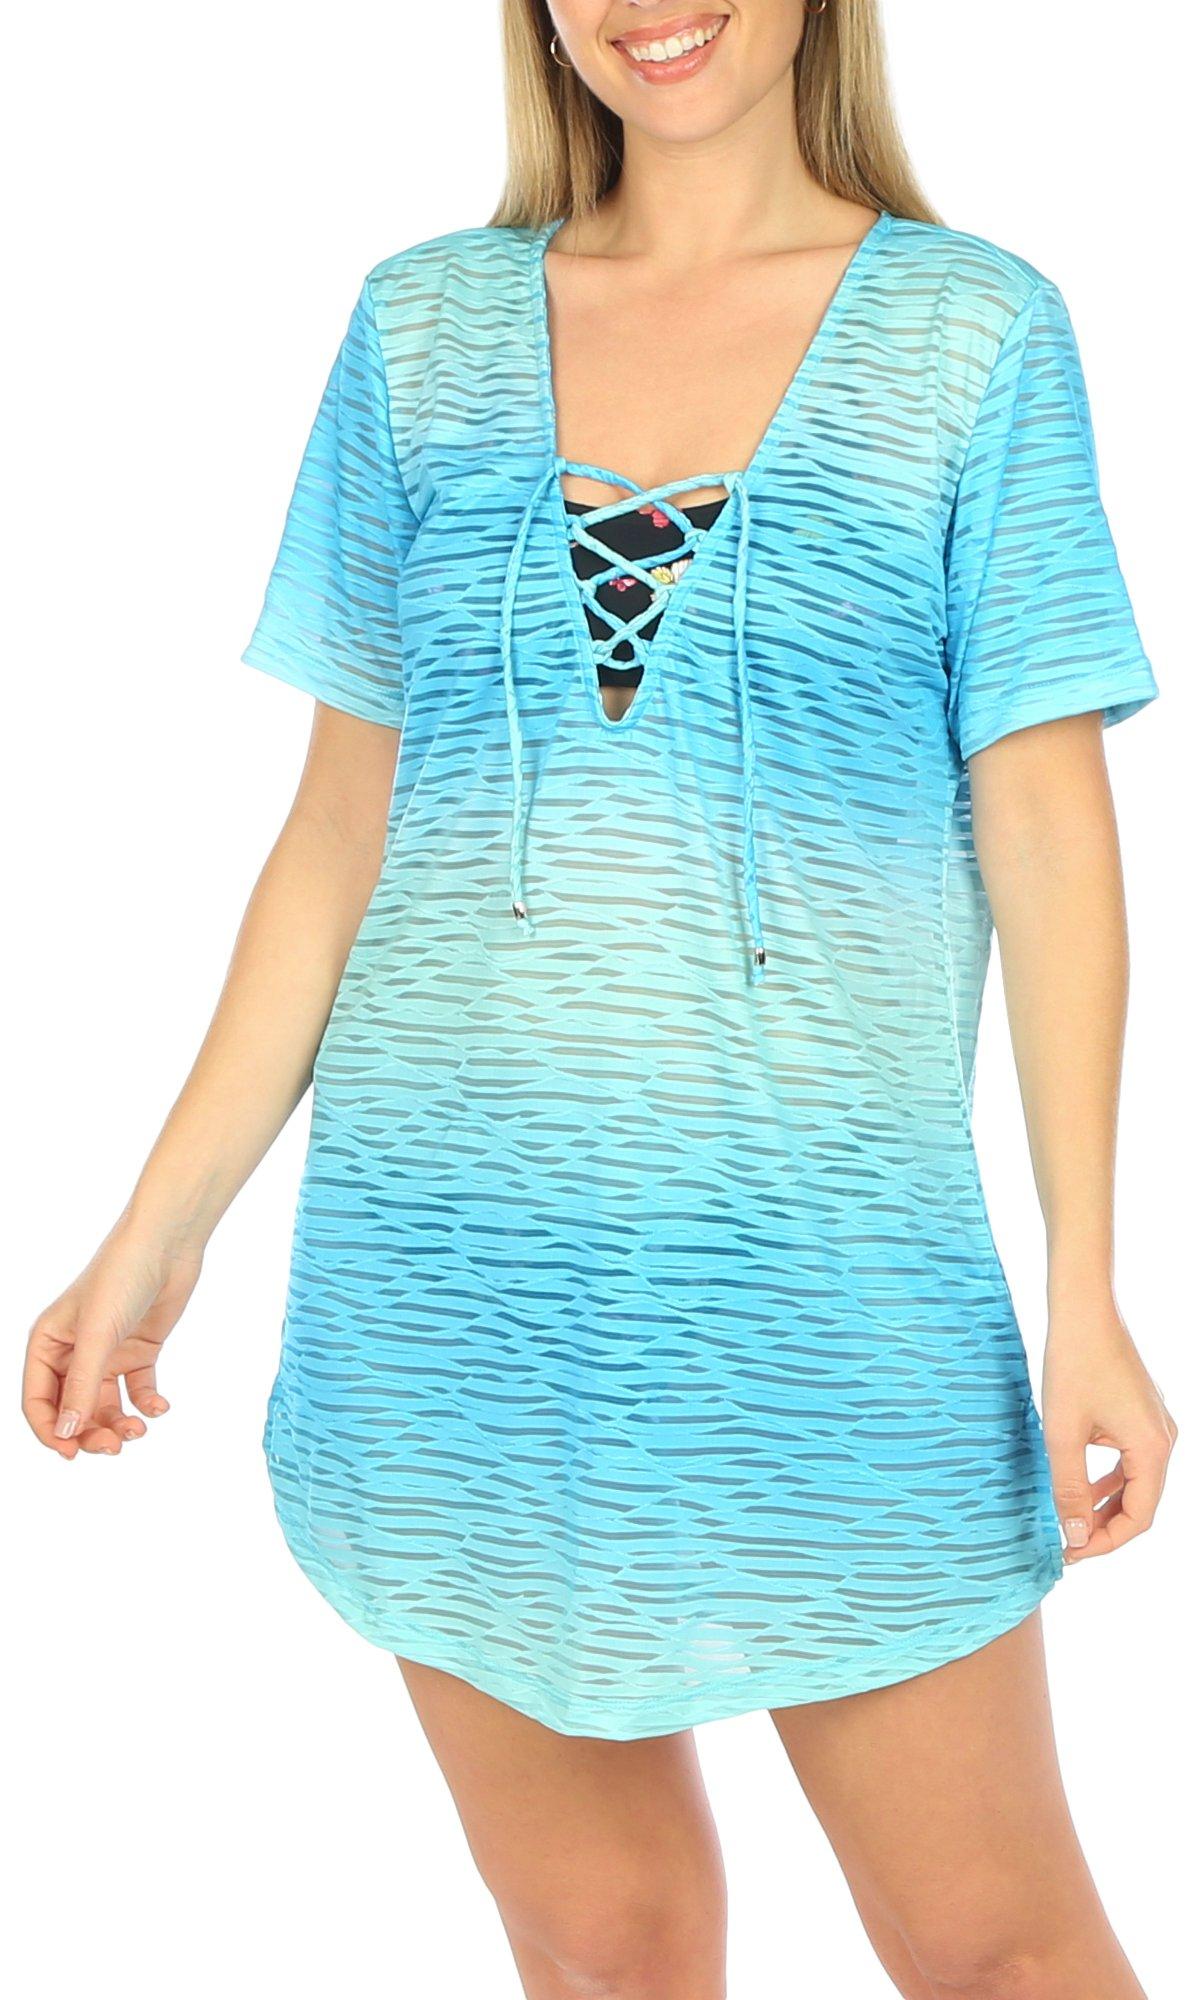 Womens Ombre Lace Up Coverup